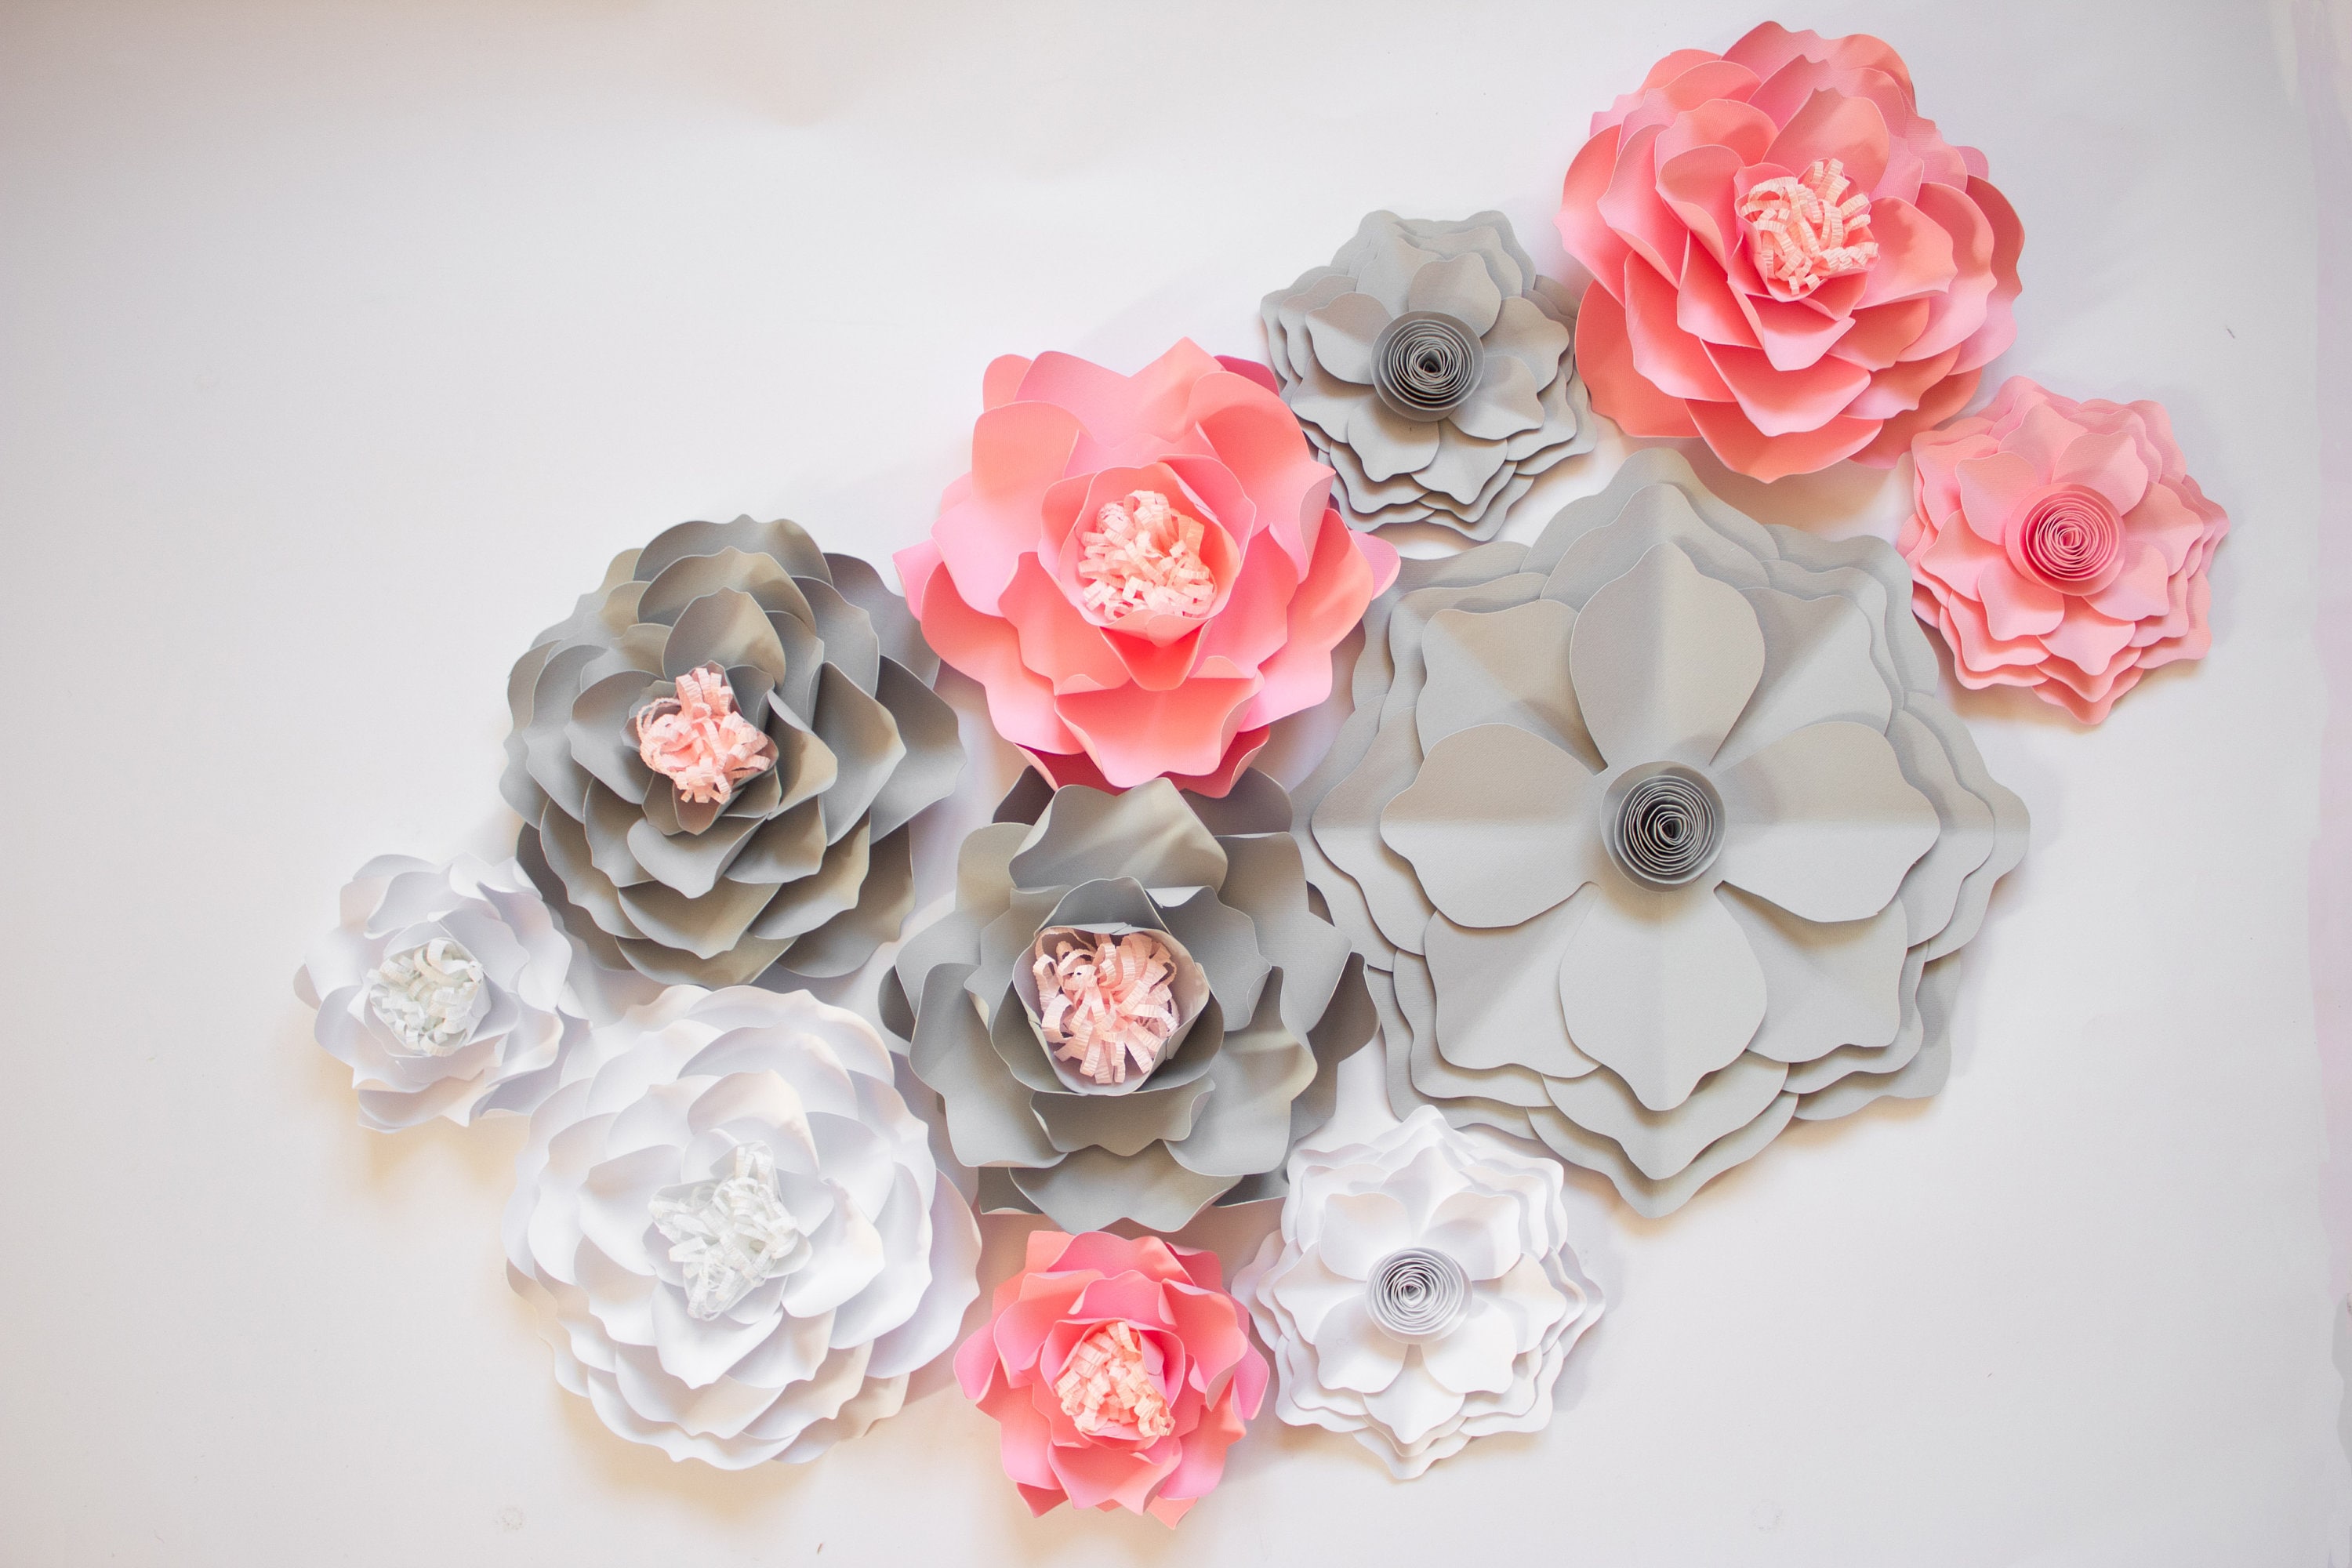 3D Artificial Paper Flower Decorations for Wall(Ivory Pink Rose Gold, Set  of 16), Wedding, Bridal Shower, Baby Shower, Nursery Decor, Centerpieces,  Flower Backd - China 3D Artificial Paper Flower Decorations and Wall